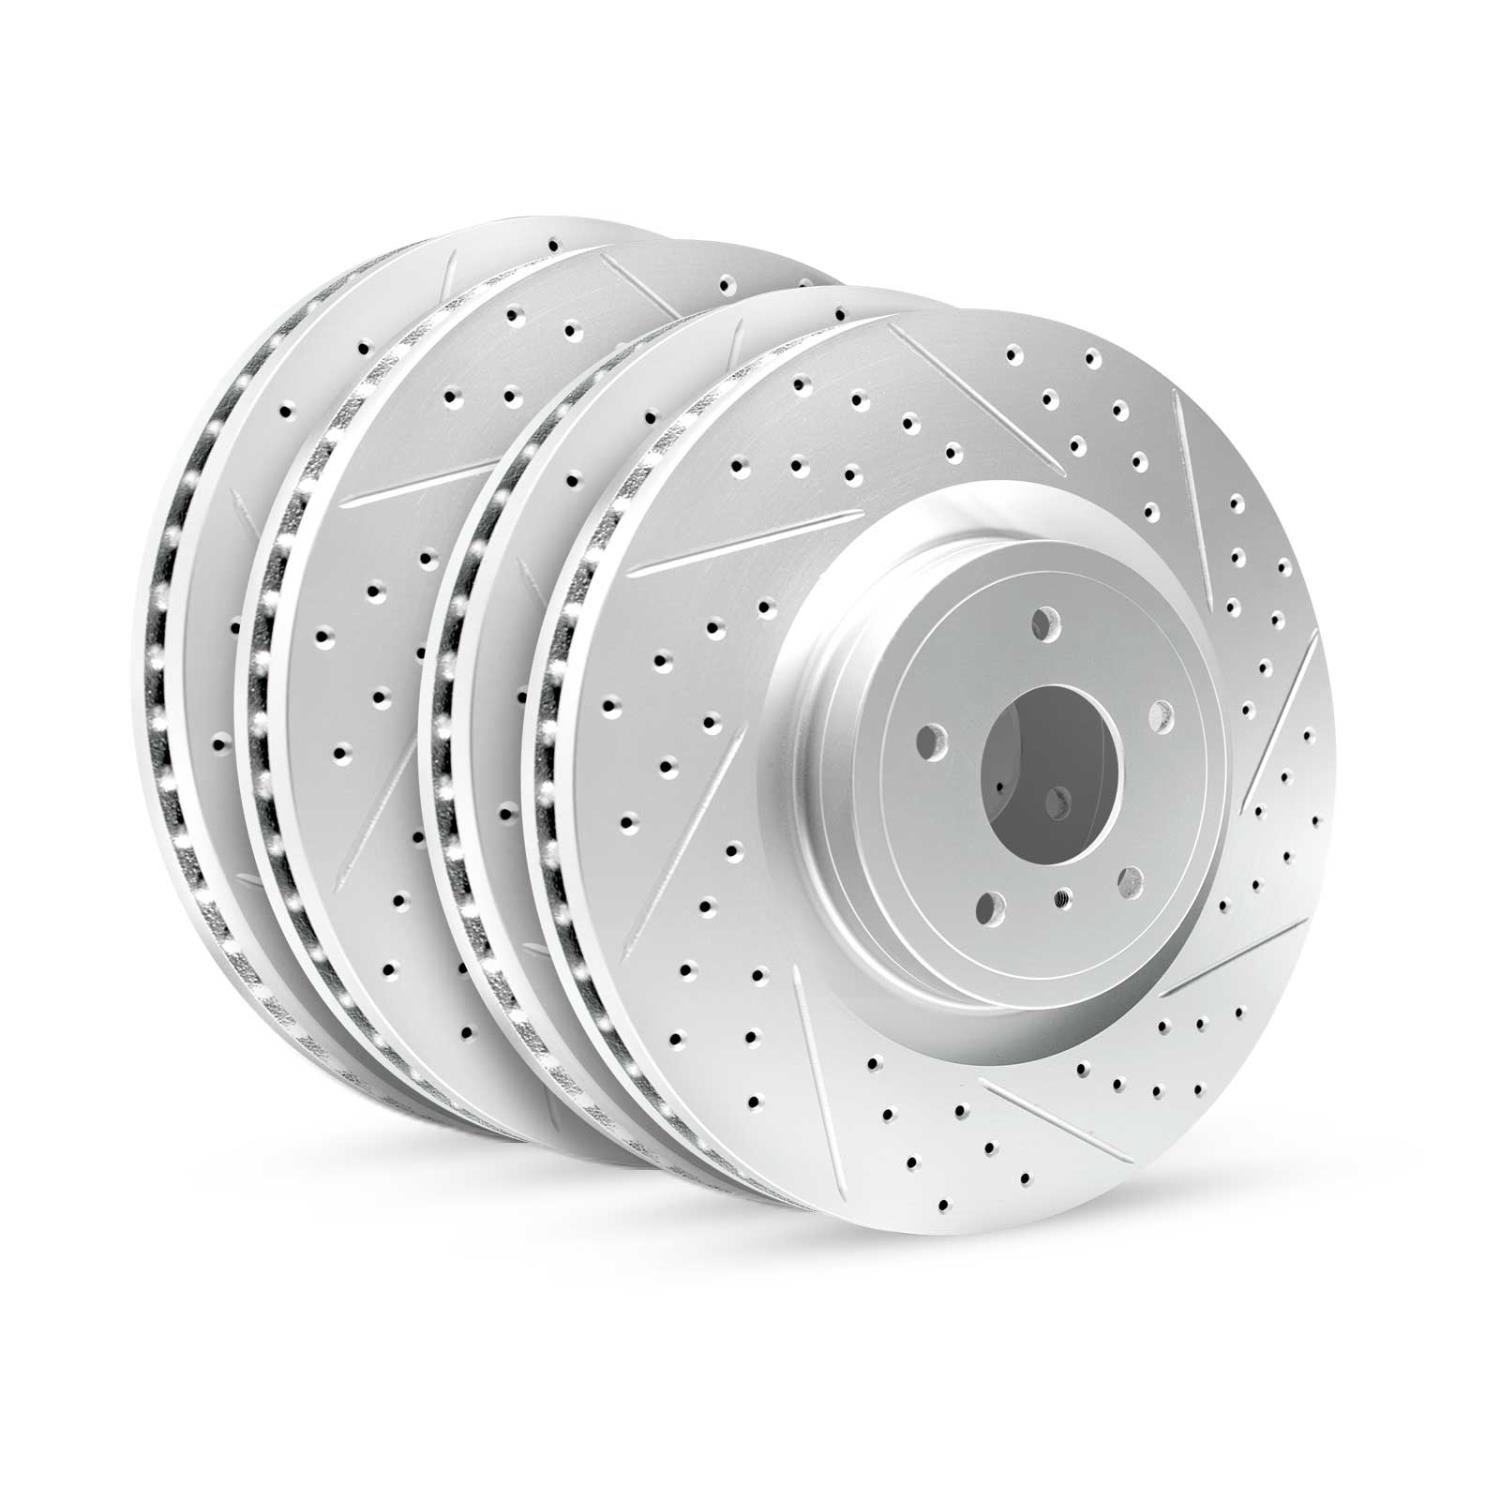 GEO-Carbon Drilled/Slotted Rotors, 2007-2013 Ford/Mazda,